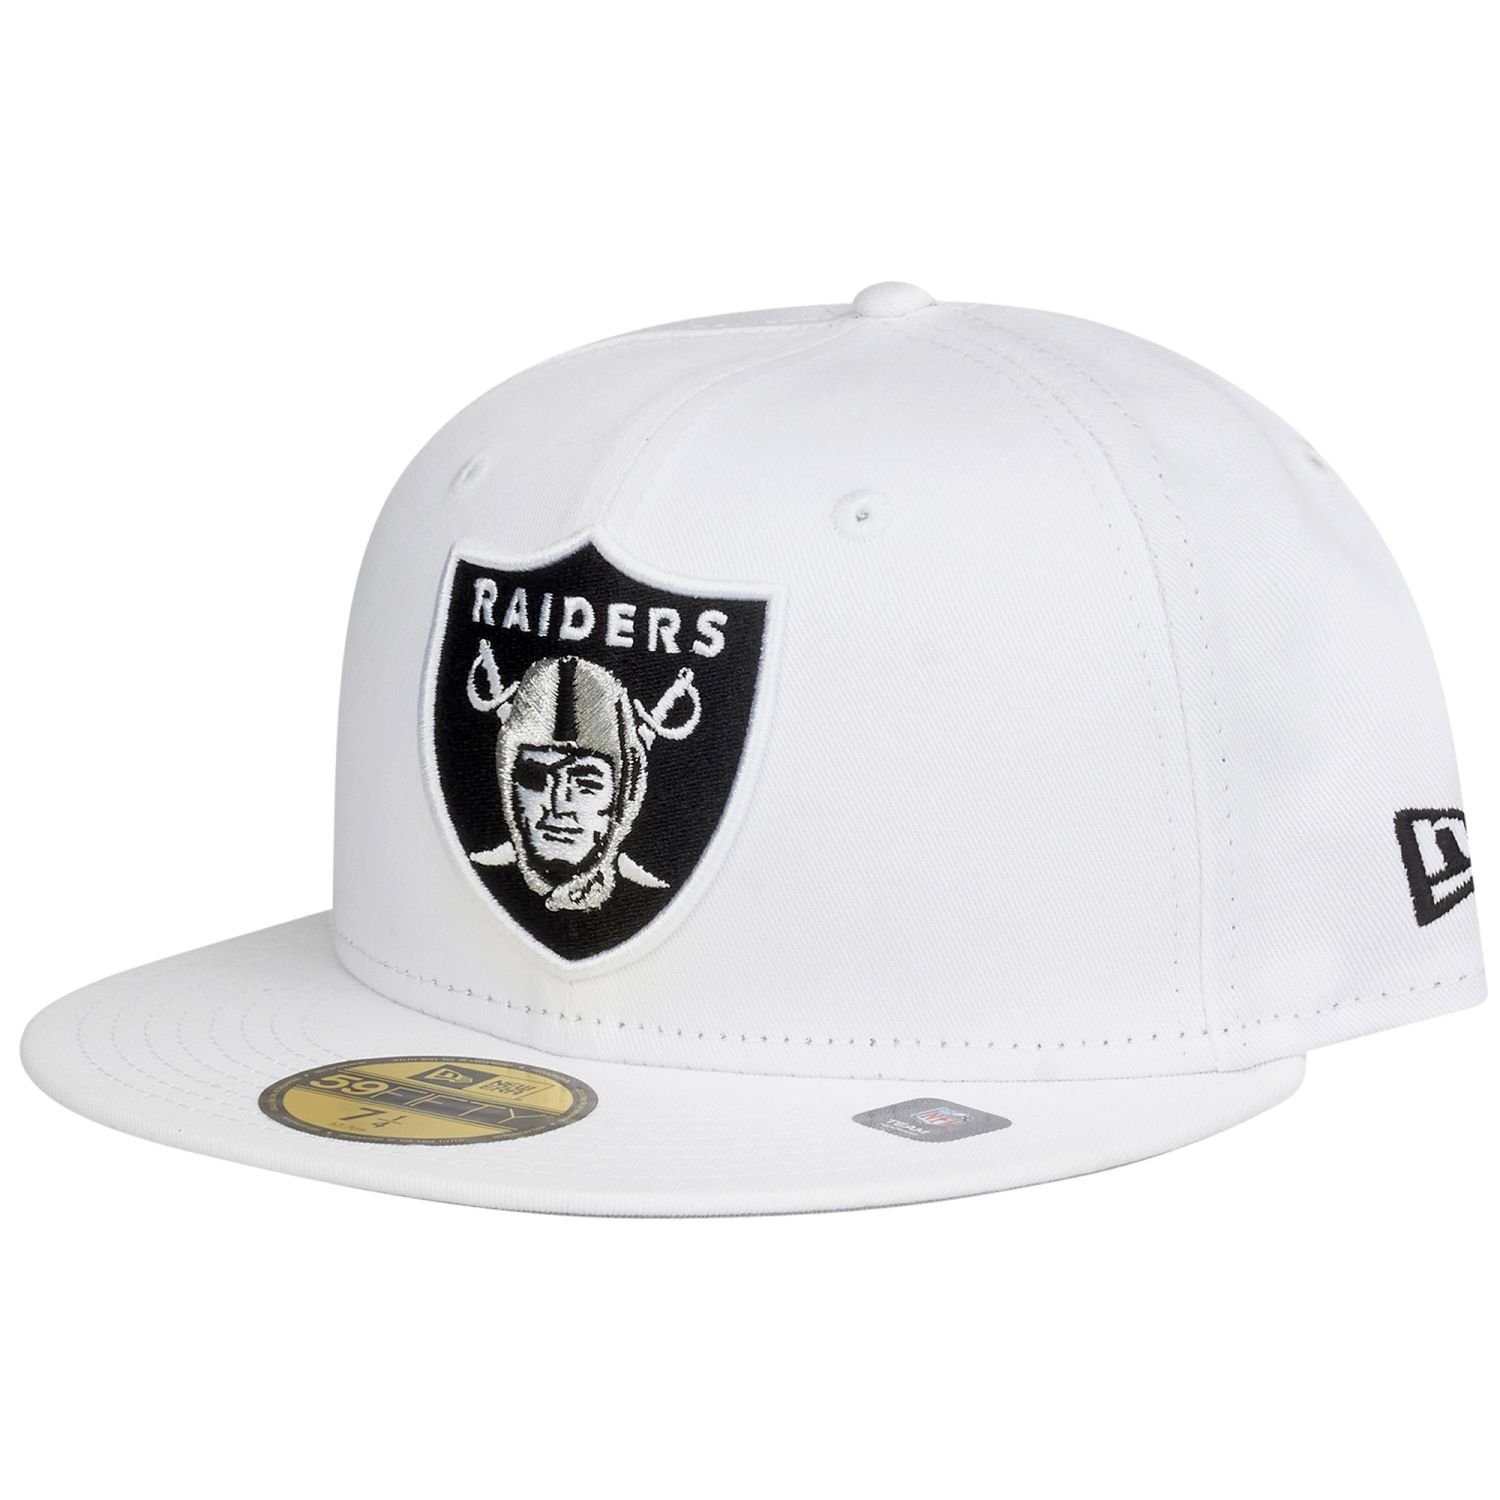 Cap New Era 59Fifty Fitted Las Raiders SANDED Vegas TWILL